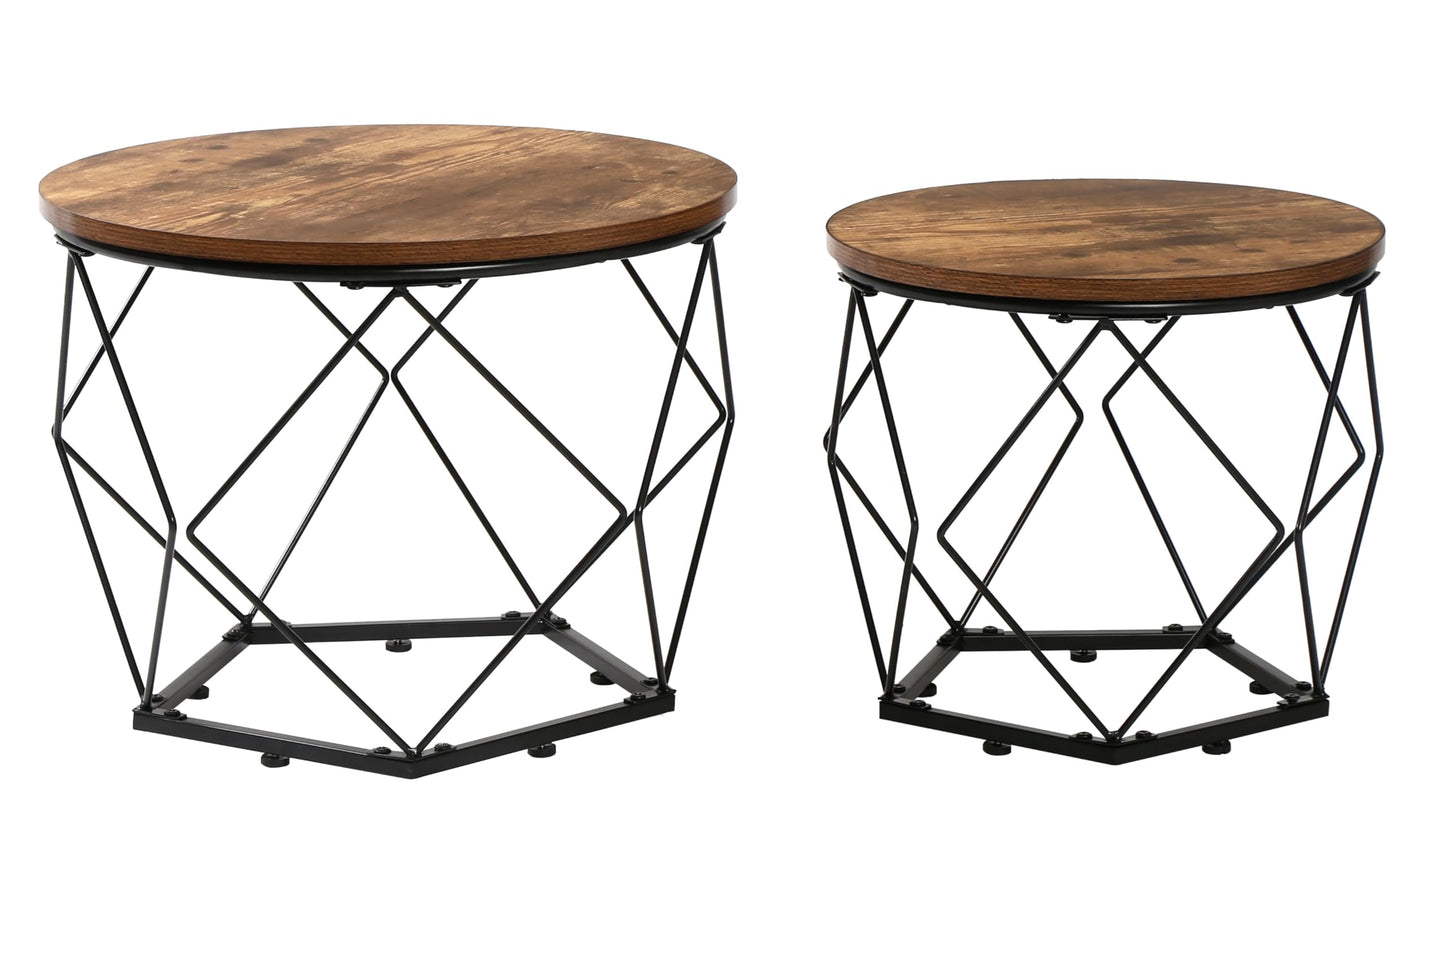 HYGRAD BUILT TO SURVIVE 2 x Set Of Round Industrial Look Rustic End Nesting Side End Tables Stools With Crystal shape Metal Frame